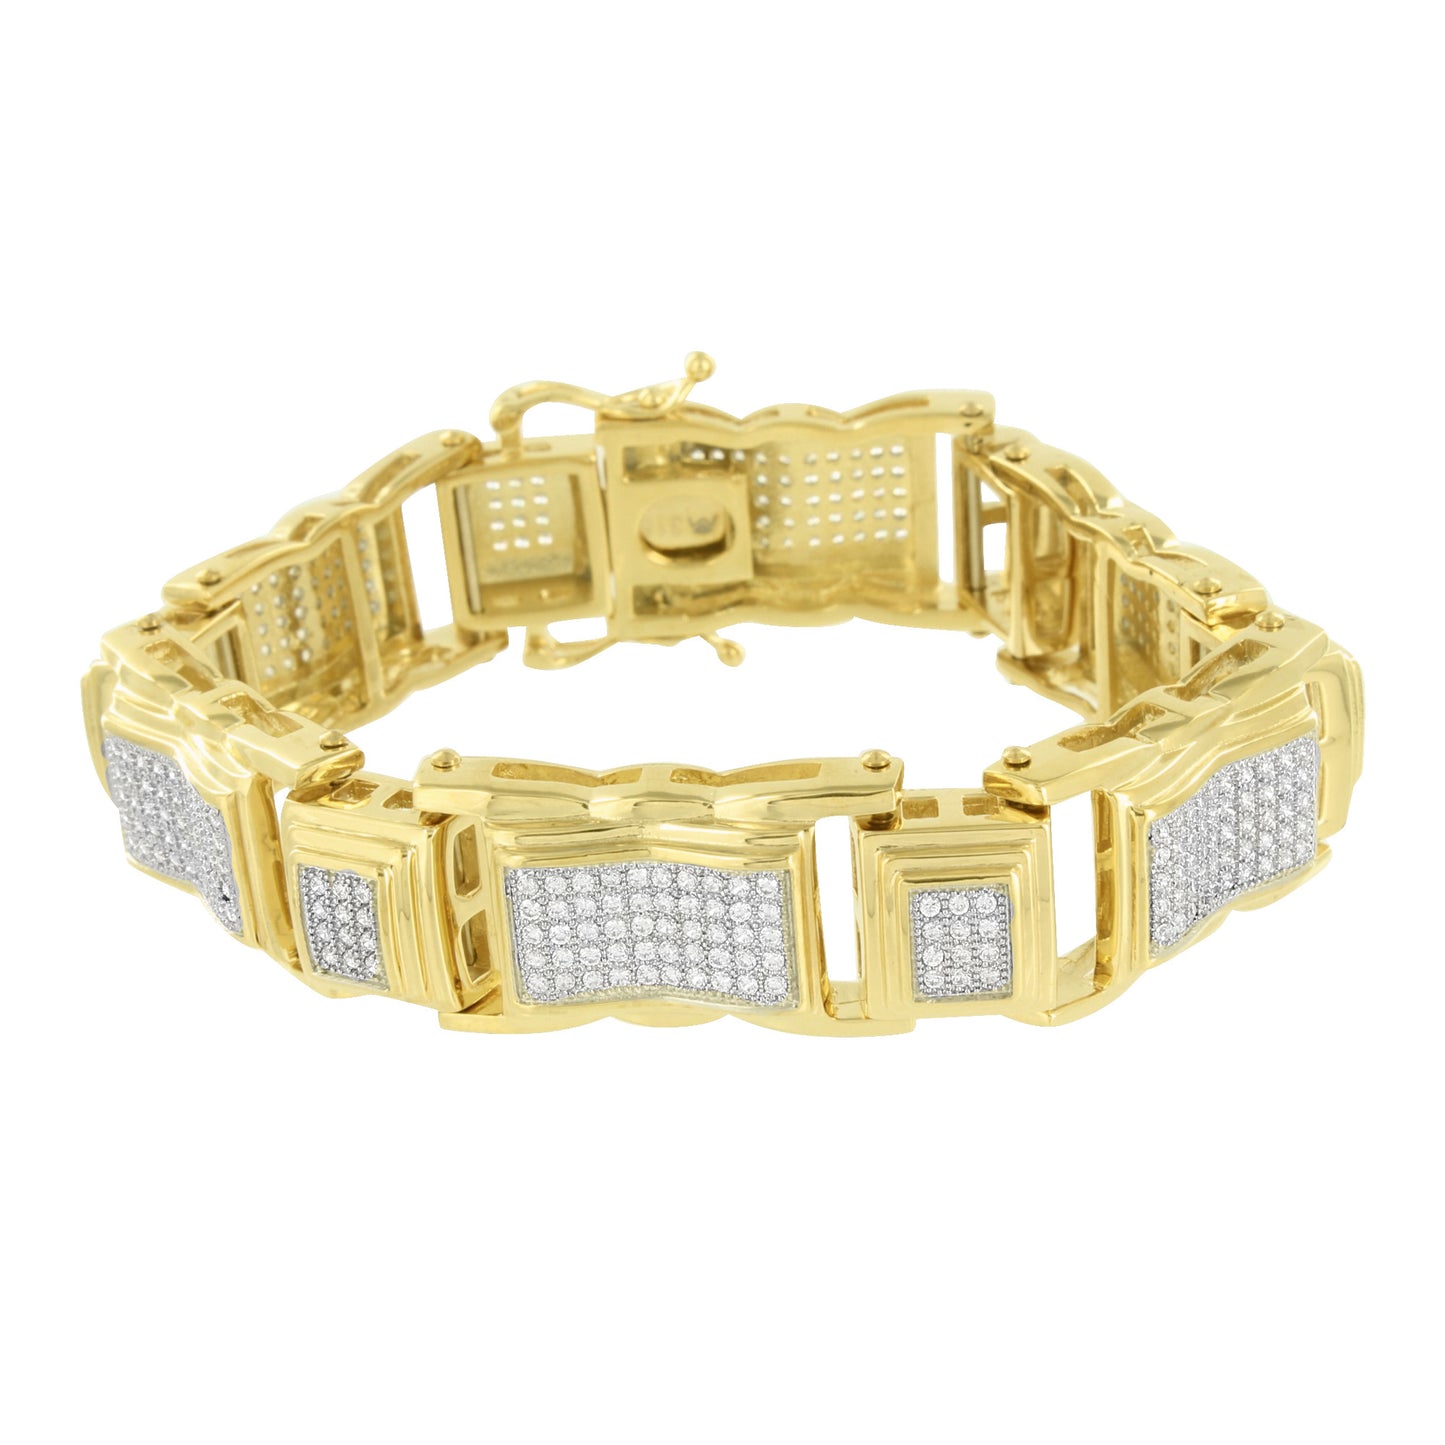 Stainless Steel Bracelet On Sale For Mens 14k Yellow Gold Finish Lab Diamonds